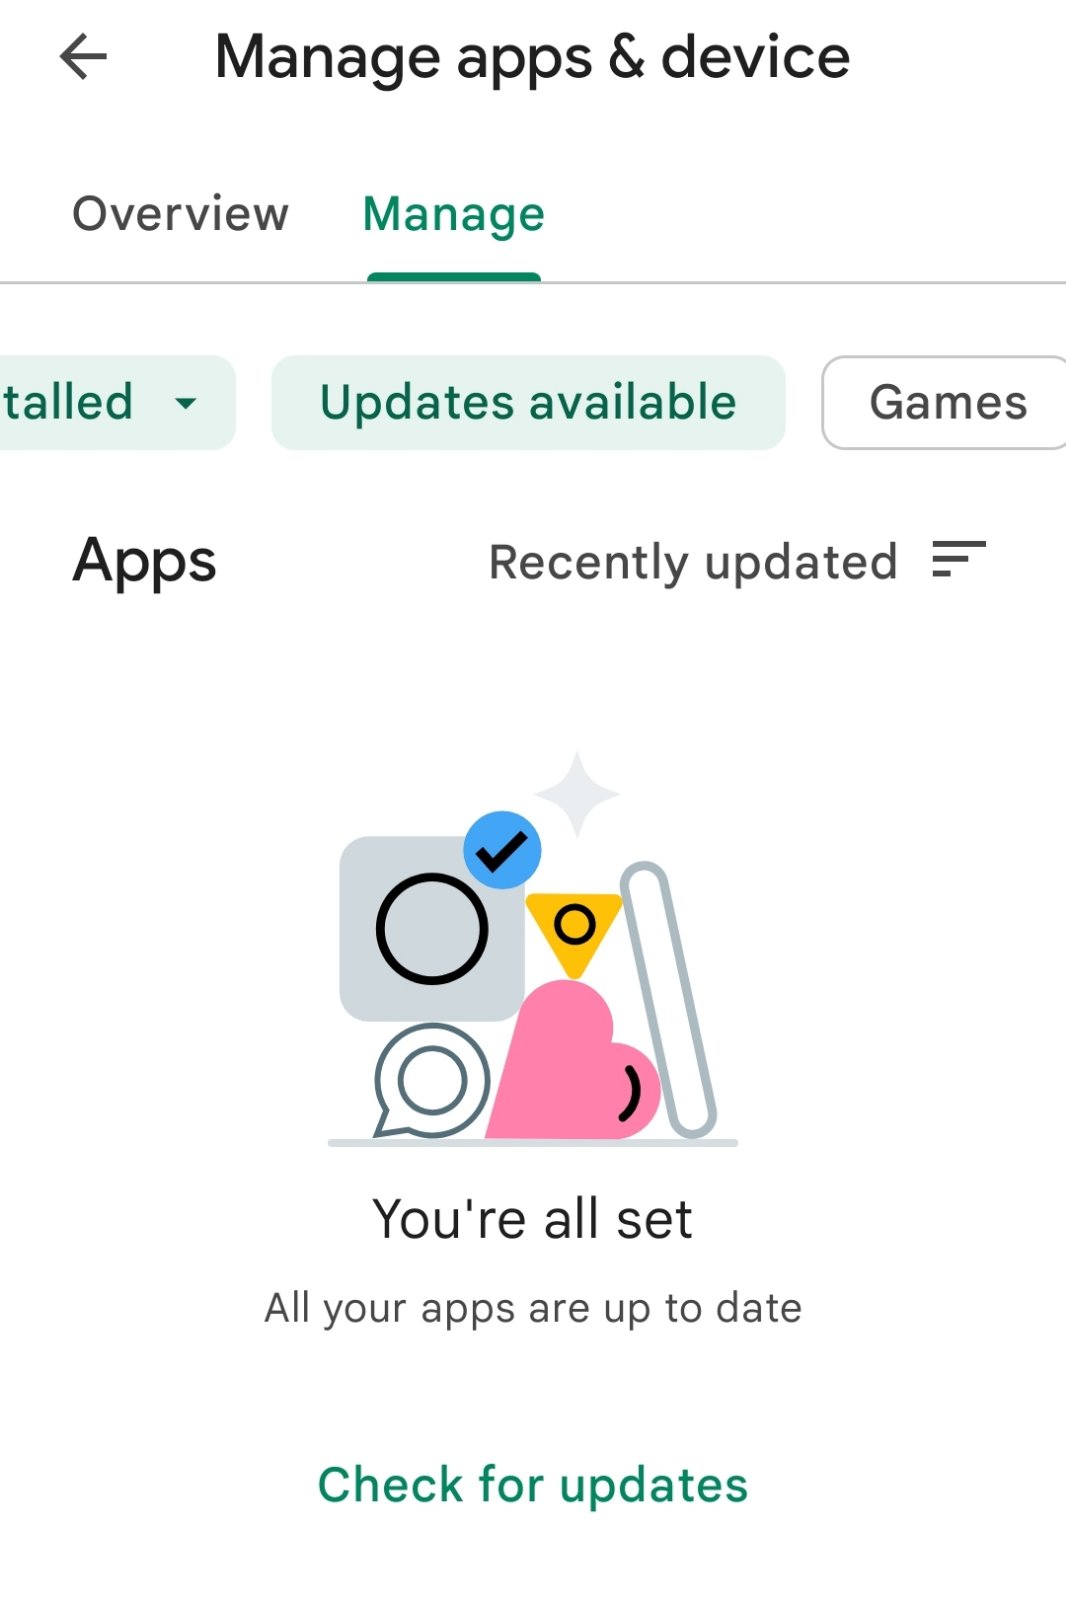 All apps are up to date